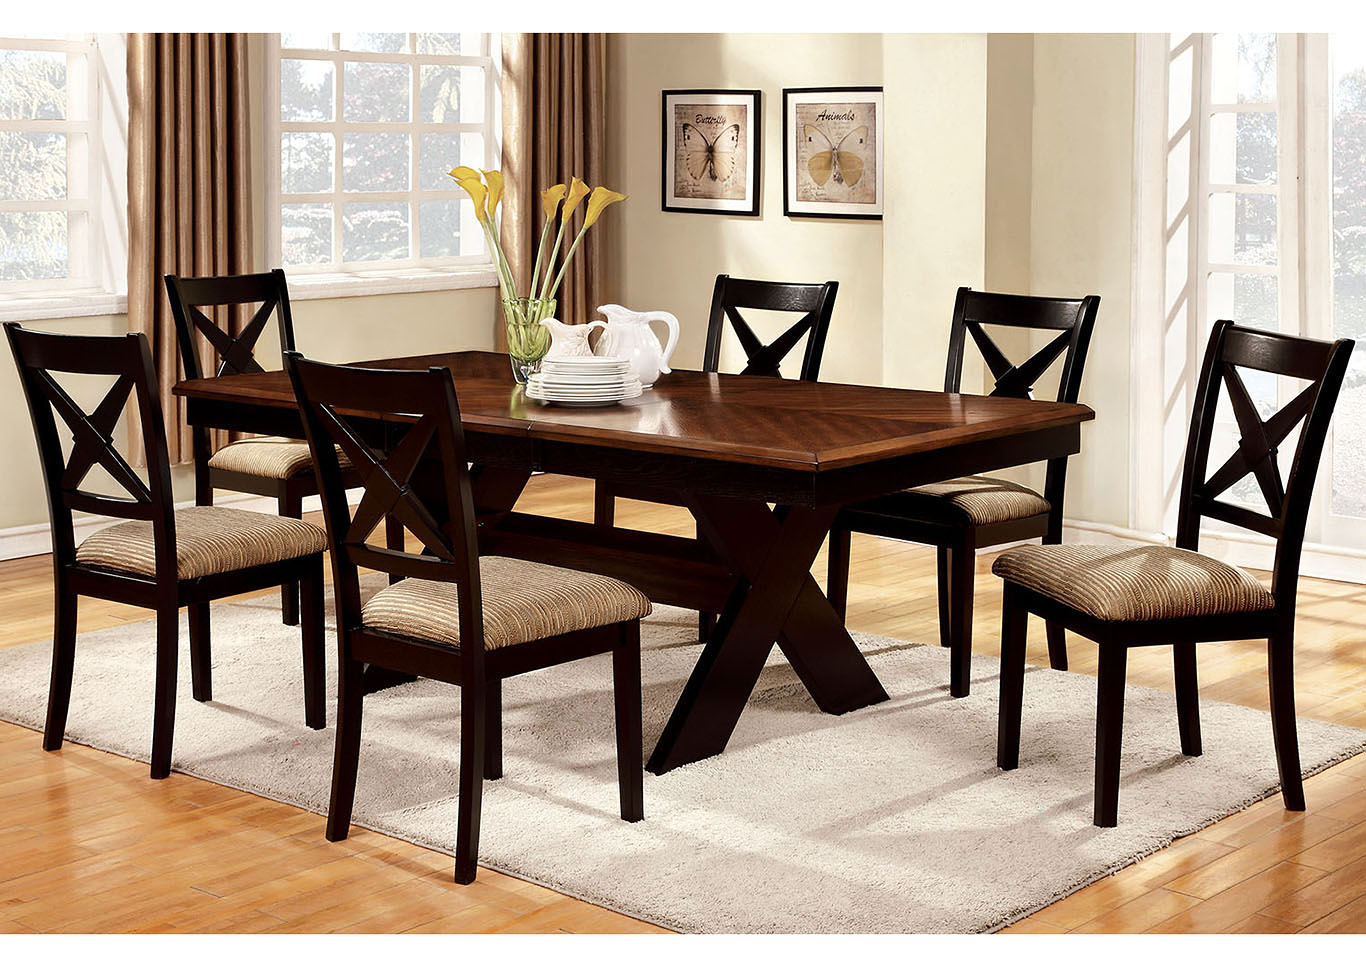 Foothills Family Furniture Liberta Extension Leaf Dining pertaining to measurements 1366 X 968